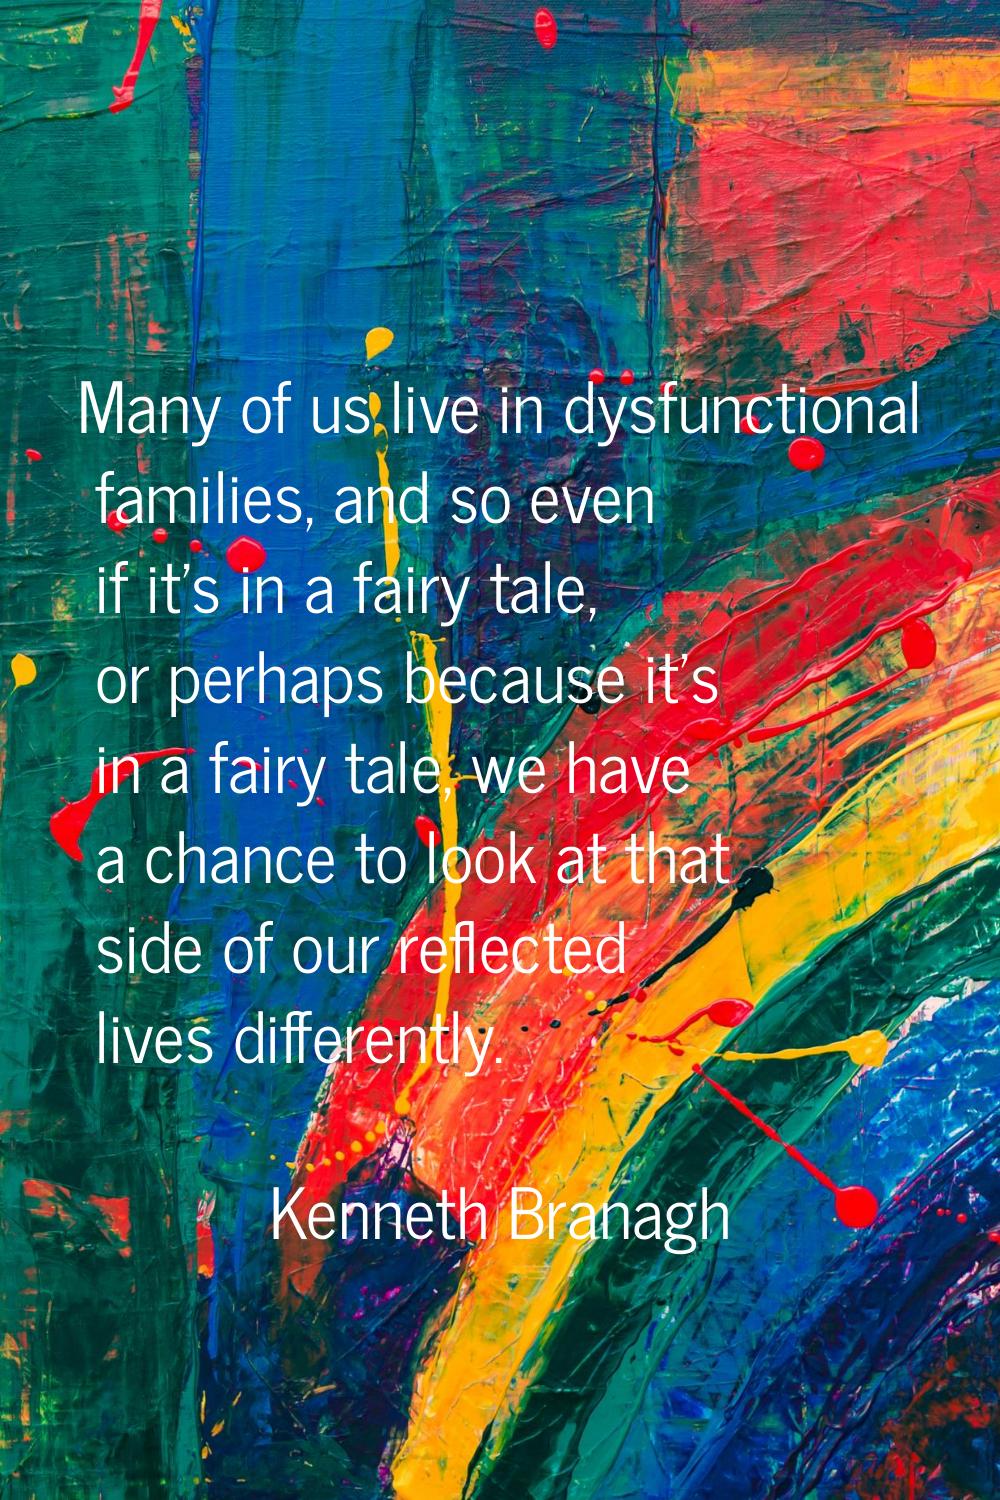 Many of us live in dysfunctional families, and so even if it's in a fairy tale, or perhaps because 